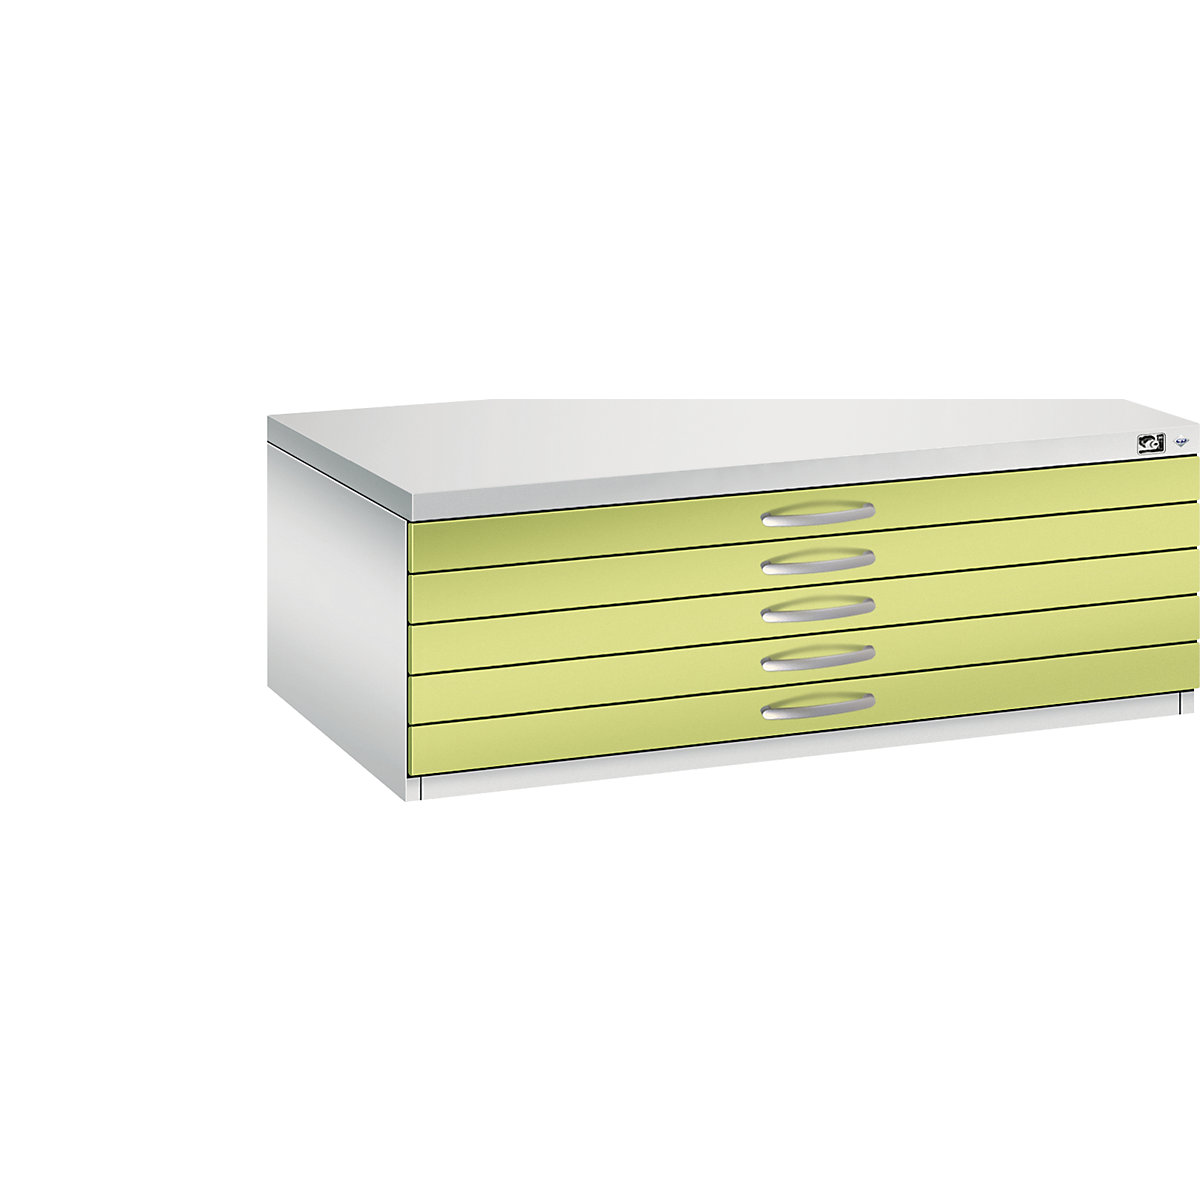 Drawing cabinet – C+P, A1, 5 drawers, height 420 mm, light grey / viridian green-14